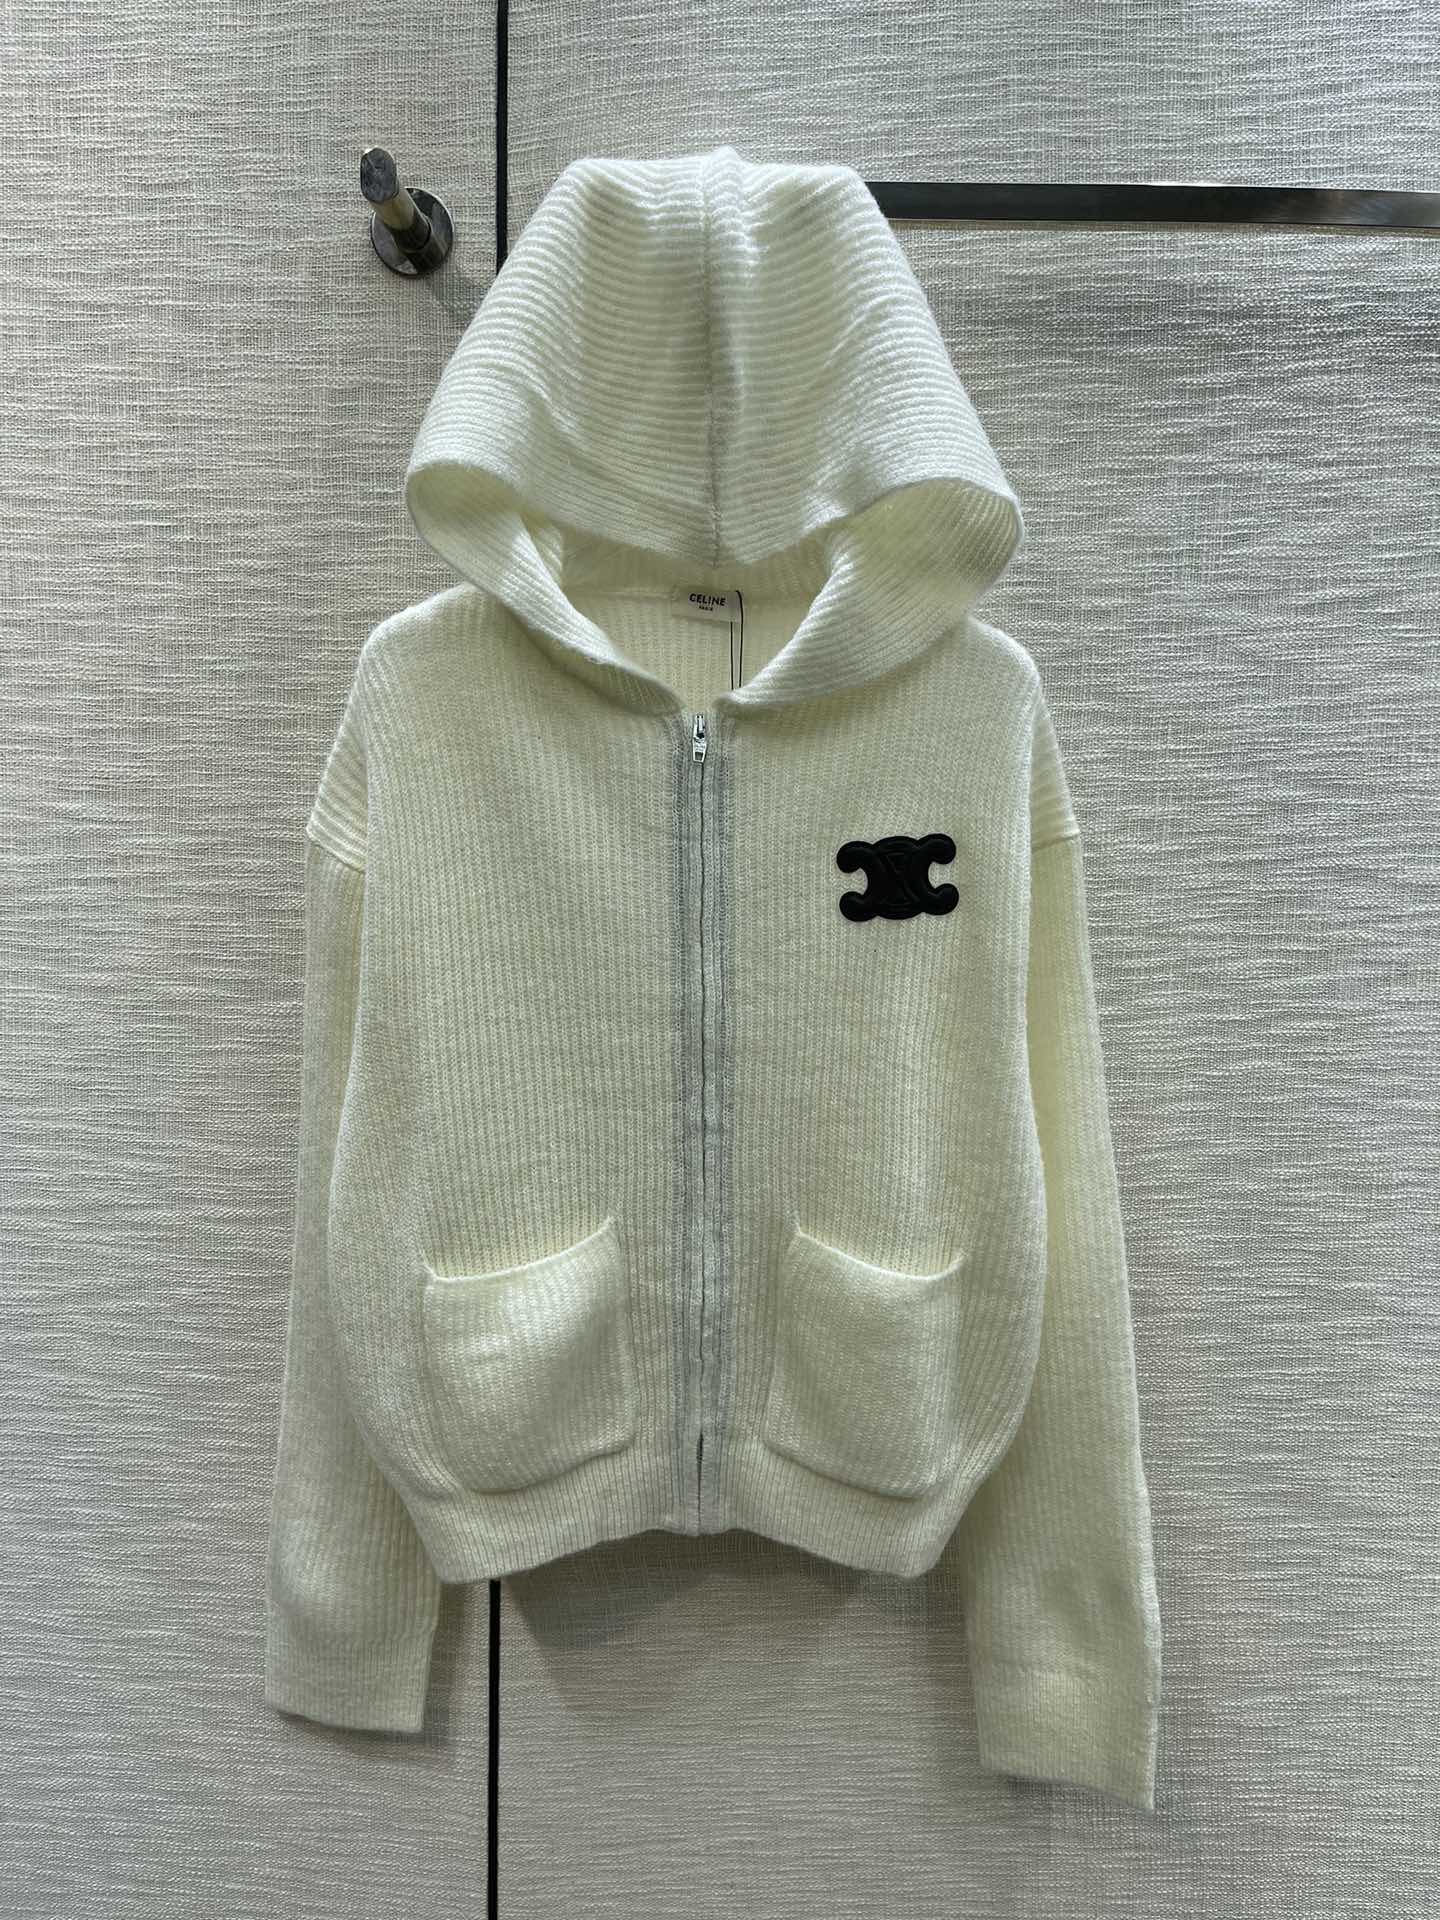 Celine Clothing Cardigans Weave Knitting Fall/Winter Collection Hooded Top